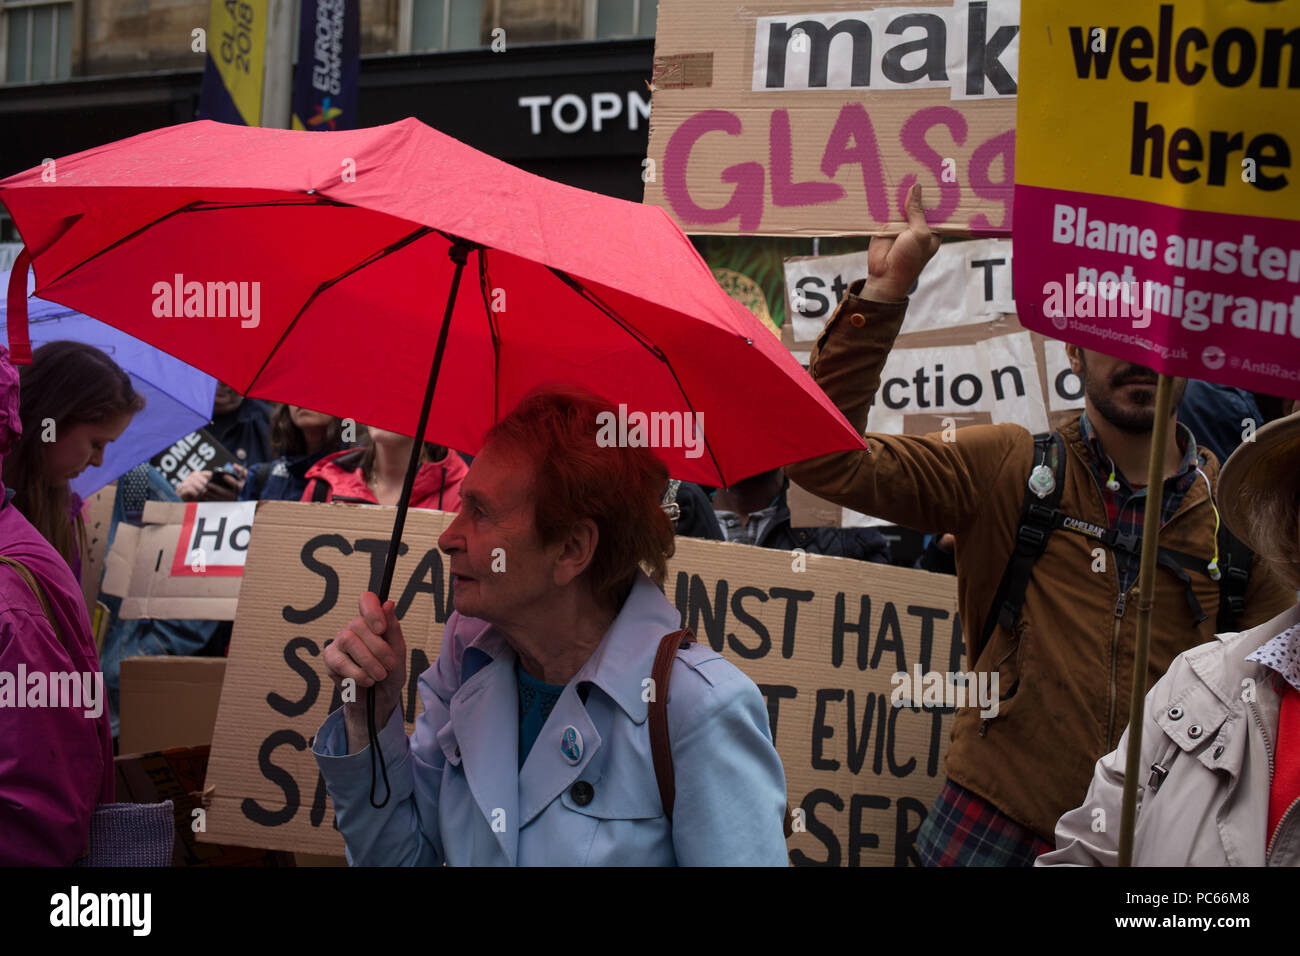 Glasgow, Scotland, on 31 July 2018. Rally in Buchanan Street, in support of refugees facing eviction by private housing company Serco. Serco announced this week that they would begin to evict asylum seekers who have had their application for refugee status rejected by the Home Office. Up to 300 refugees are facing imminent eviction. Image Credit: Jeremy Sutton-Hibbert/ Alamy News. Stock Photo